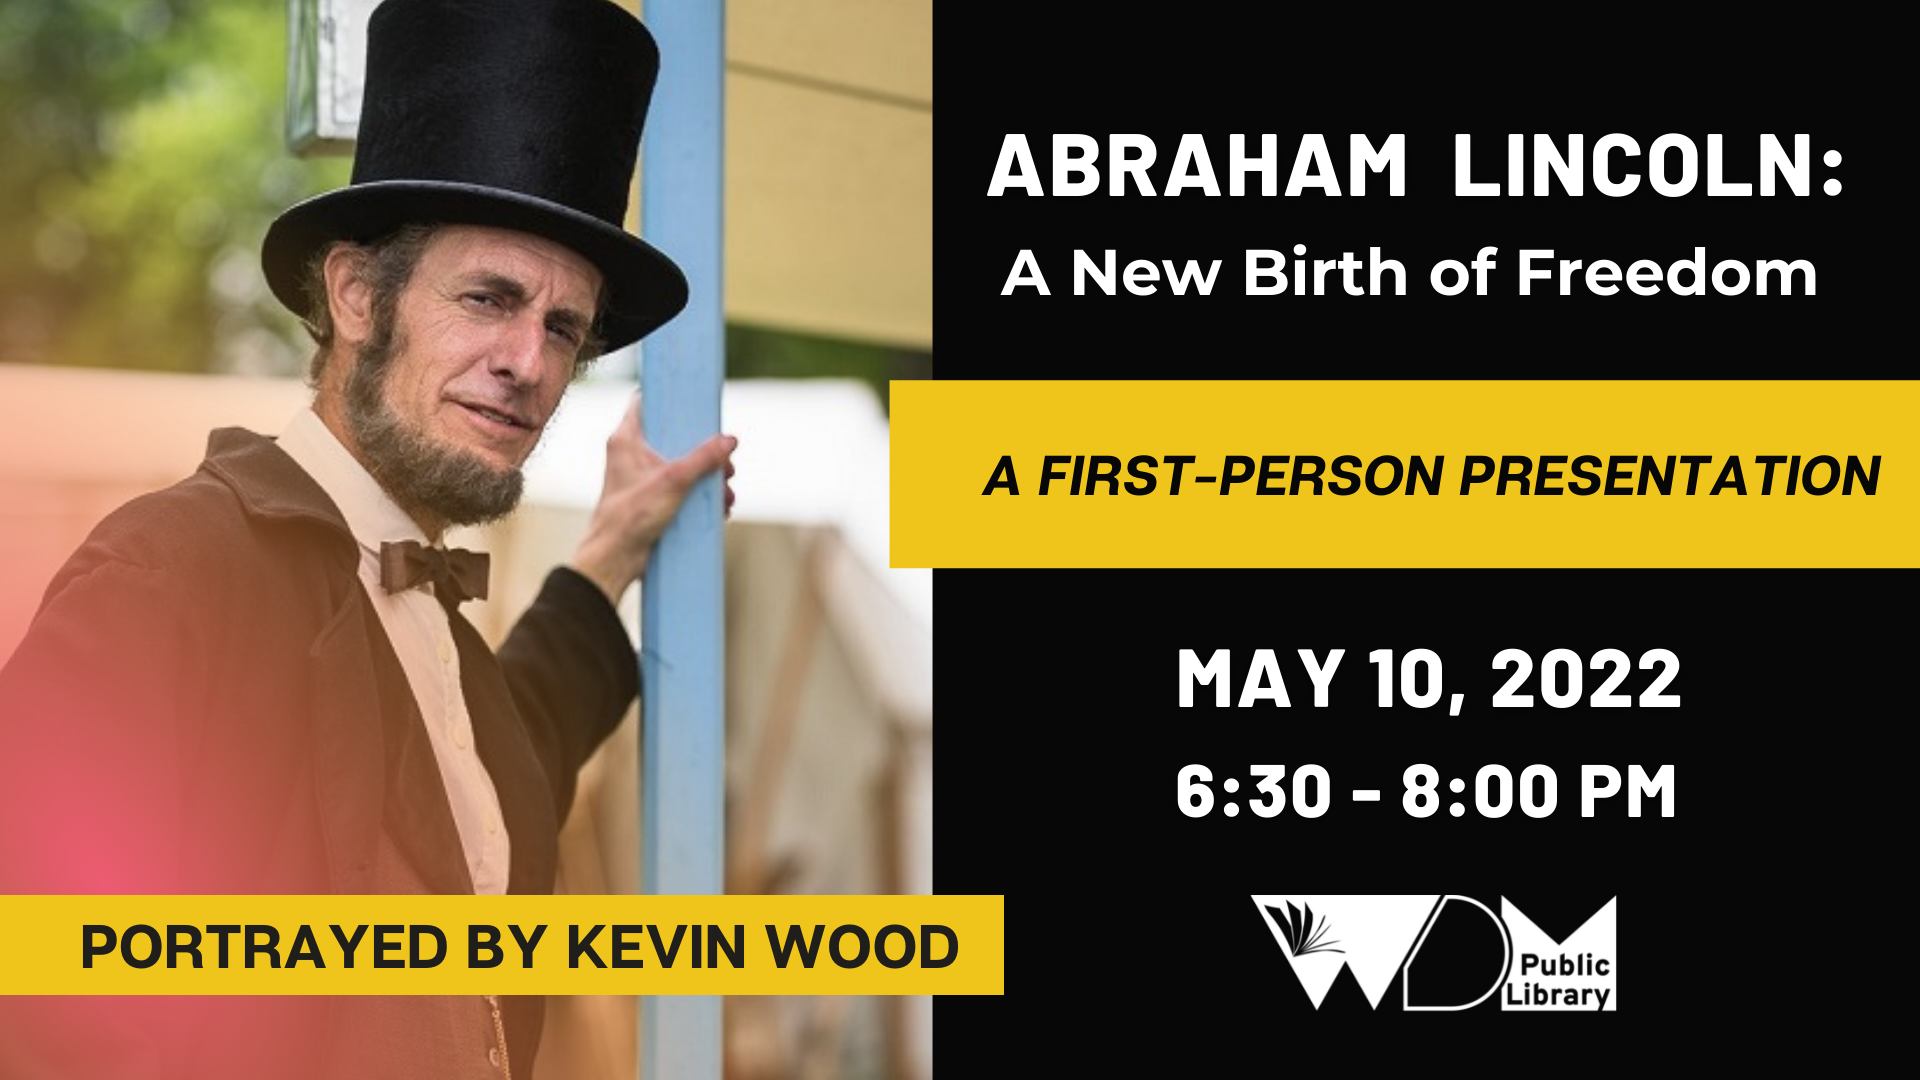 Photo of Kevin Wood as Abraham Lincoln and information about date and time